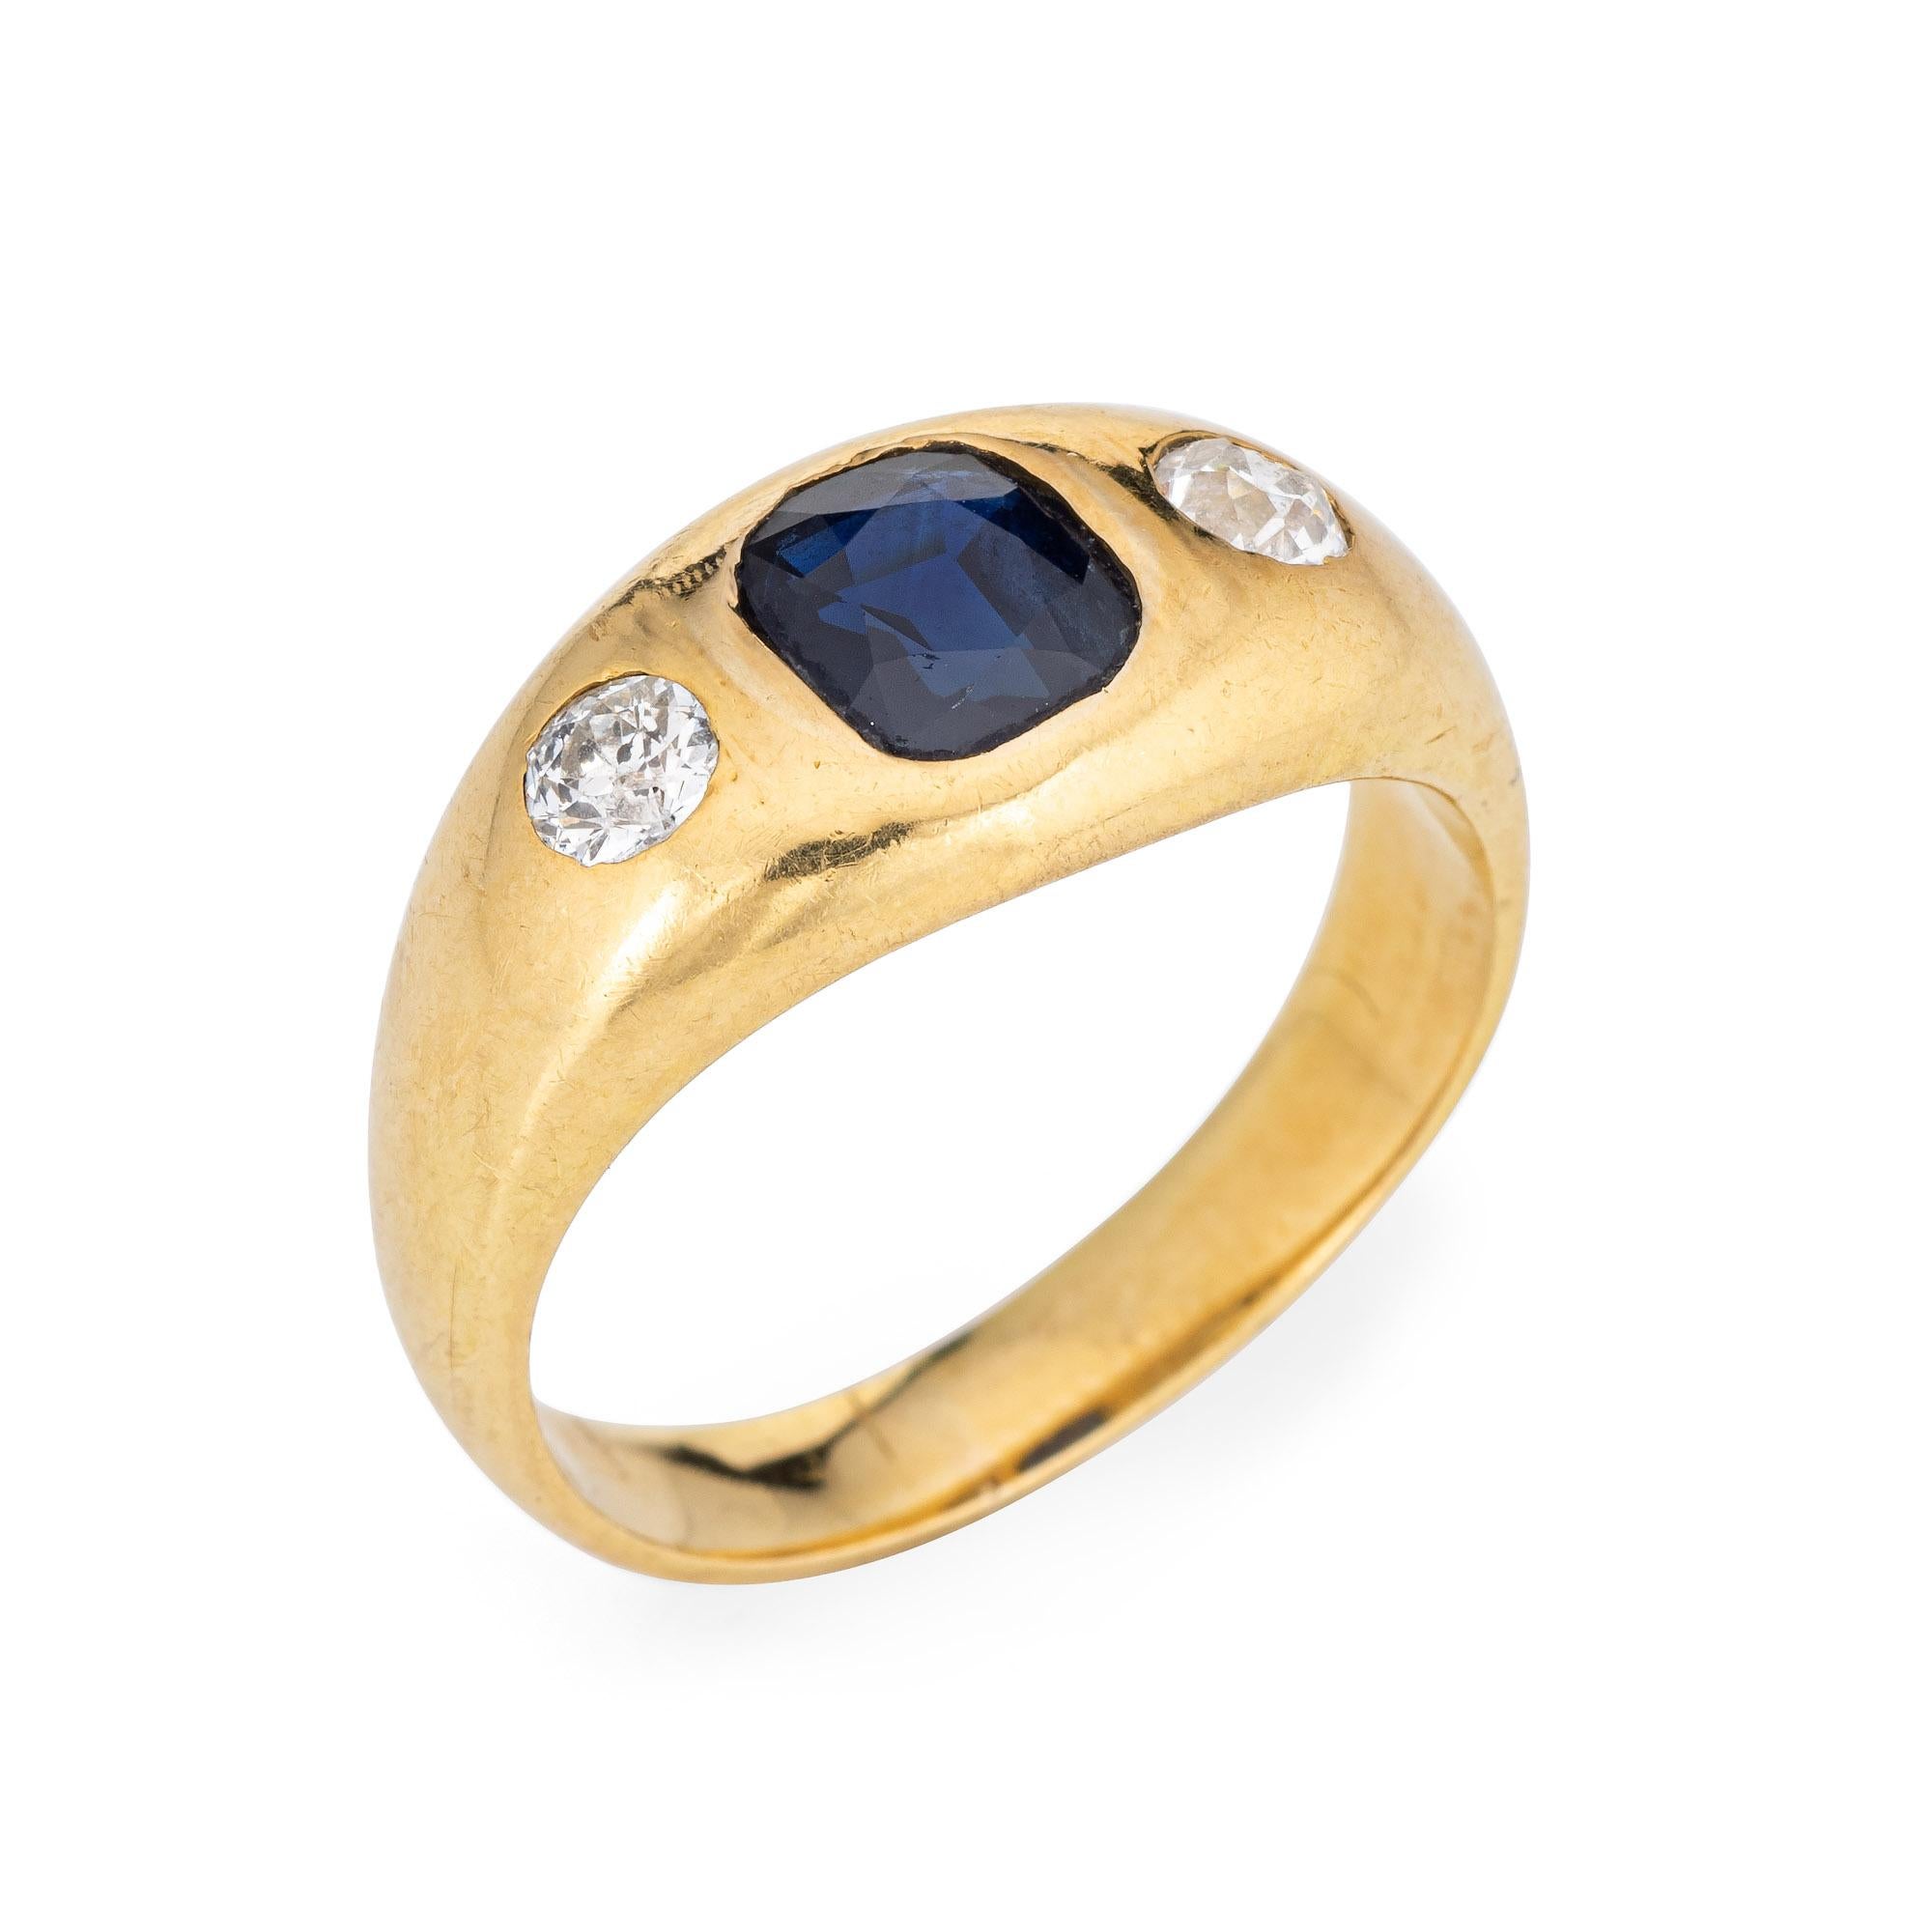 Stylish French antique Victorian sapphire & diamond ring (circa 1890s to 1900s) crafted in 18 karat yellow gold. 

Square cushion cut blue sapphire measures 7mm x 6mm (estimated at 1.25 carats). Two estimated 0.12 carat old mine cut diamonds total